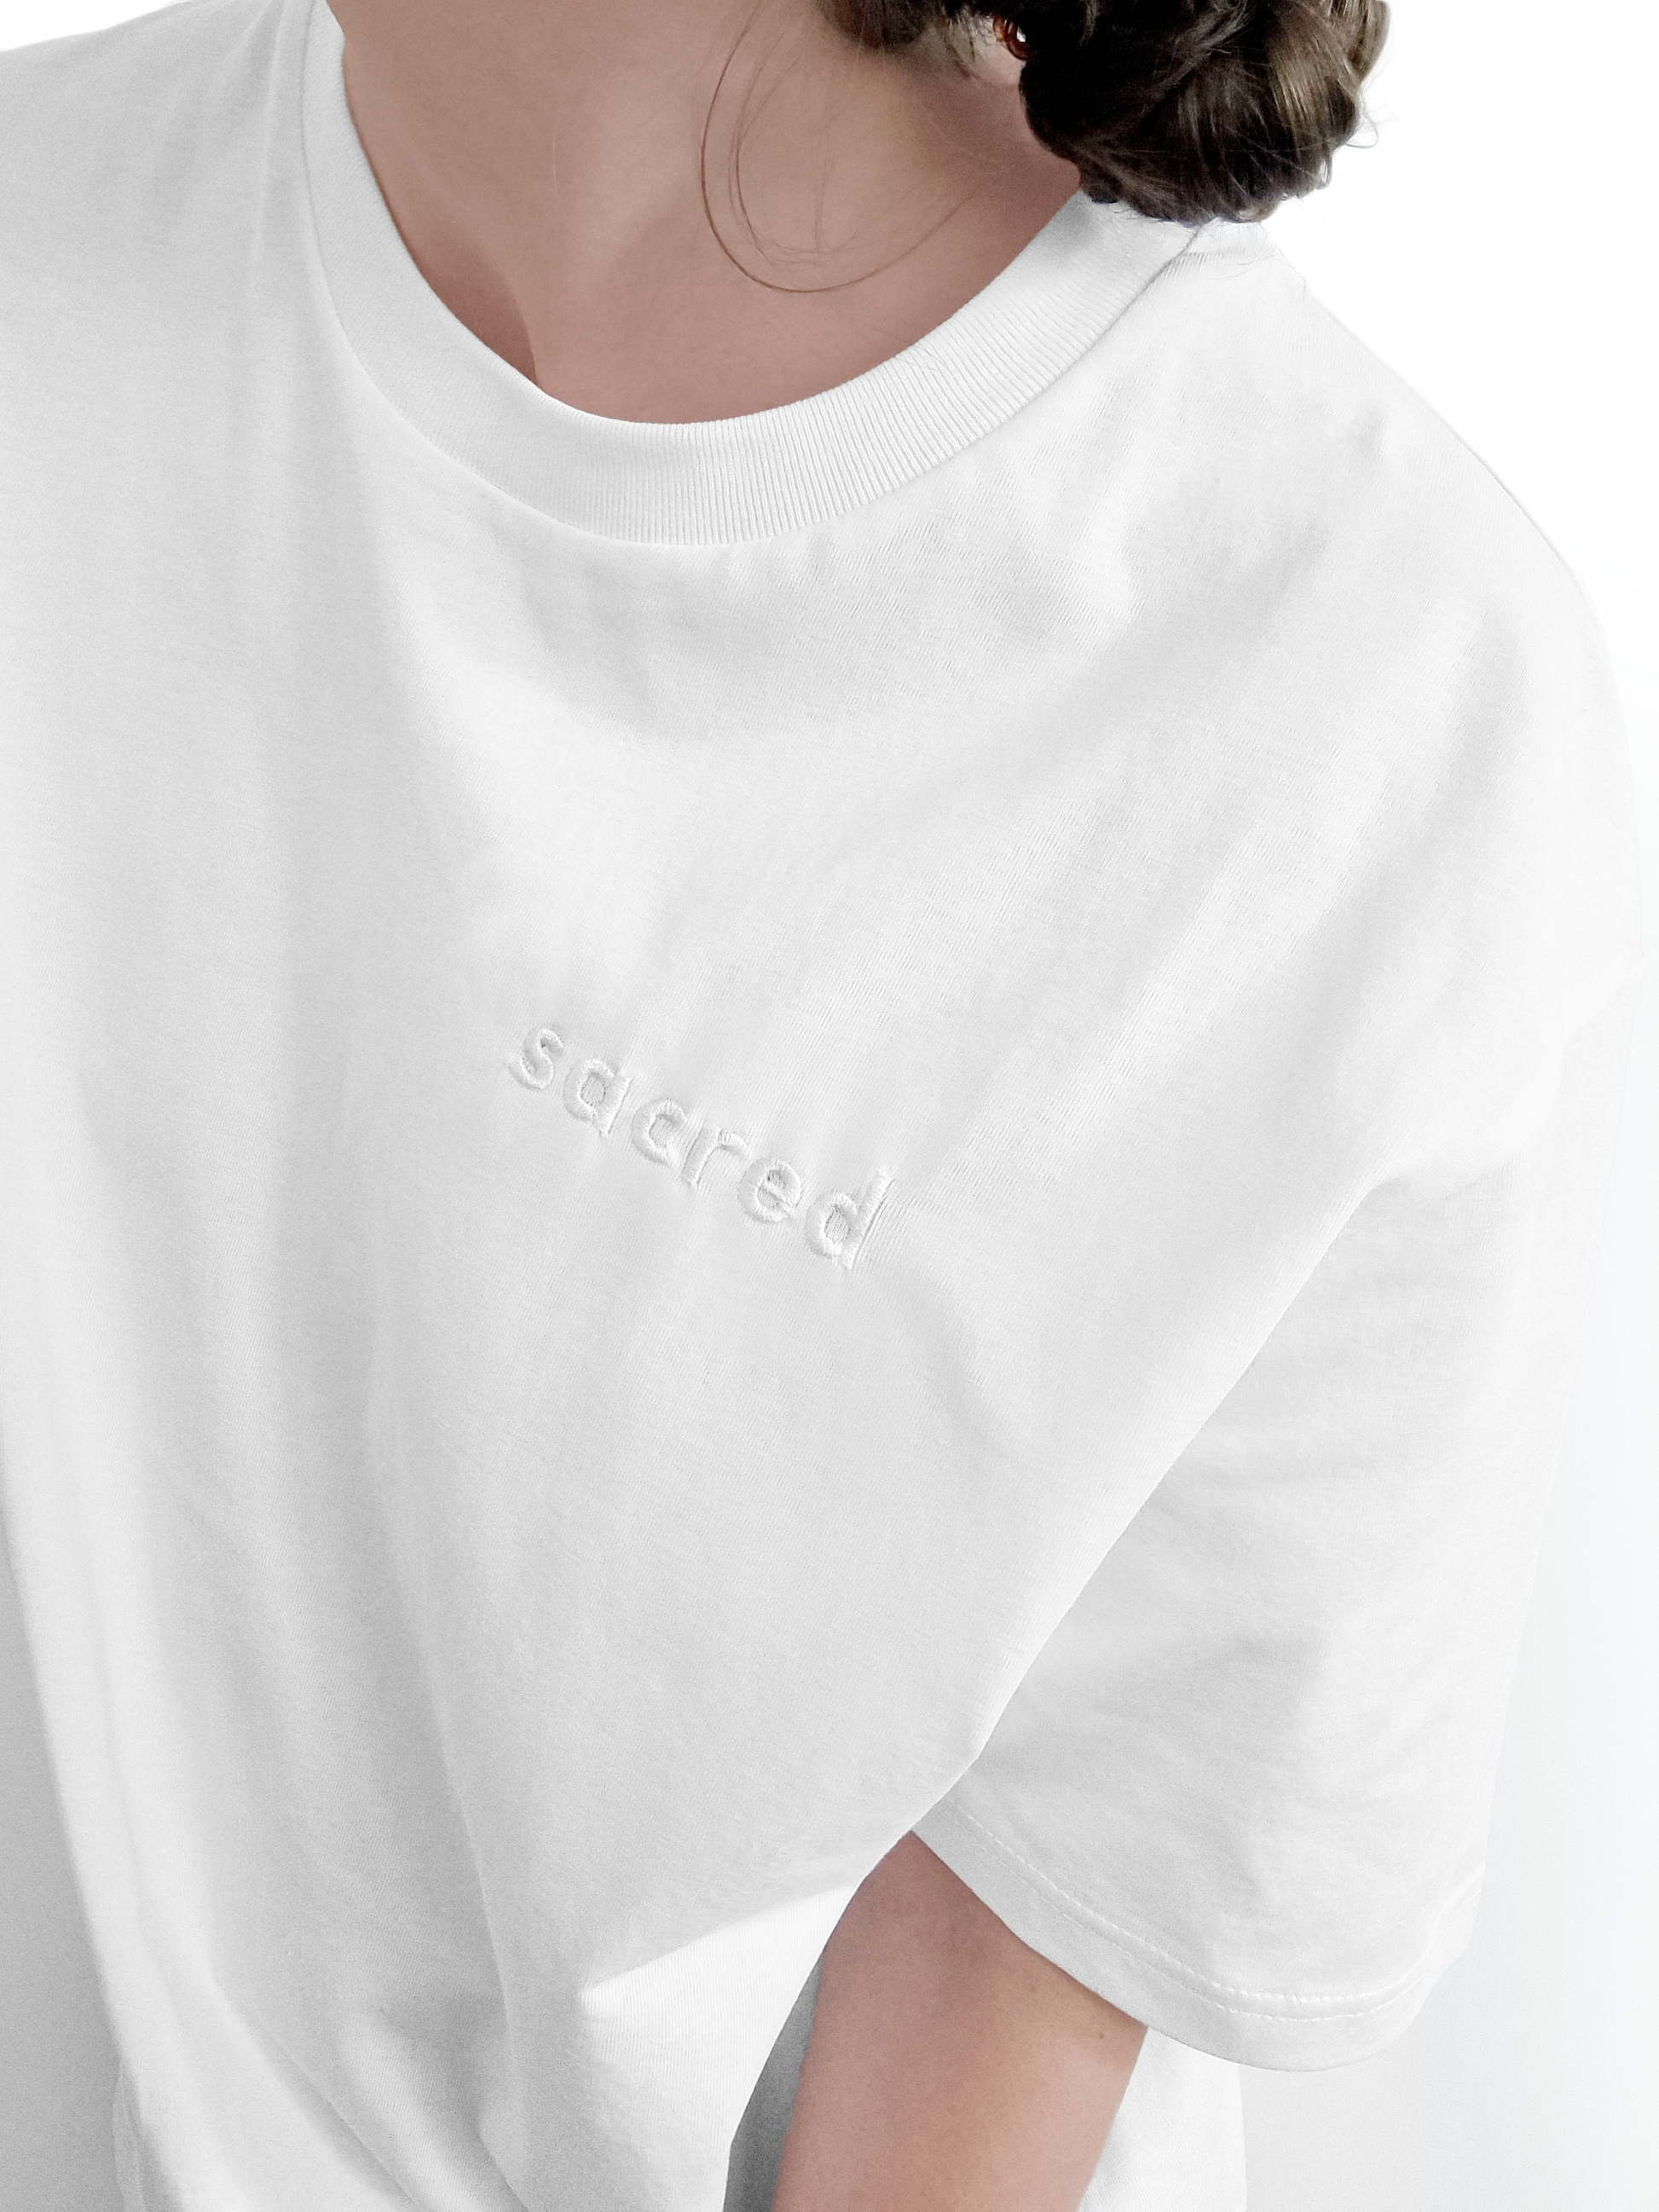 Ethical and sustainable, white organic cotton tee / t shirt with embroidered sacred design for yoga, gym, or lounge wear.